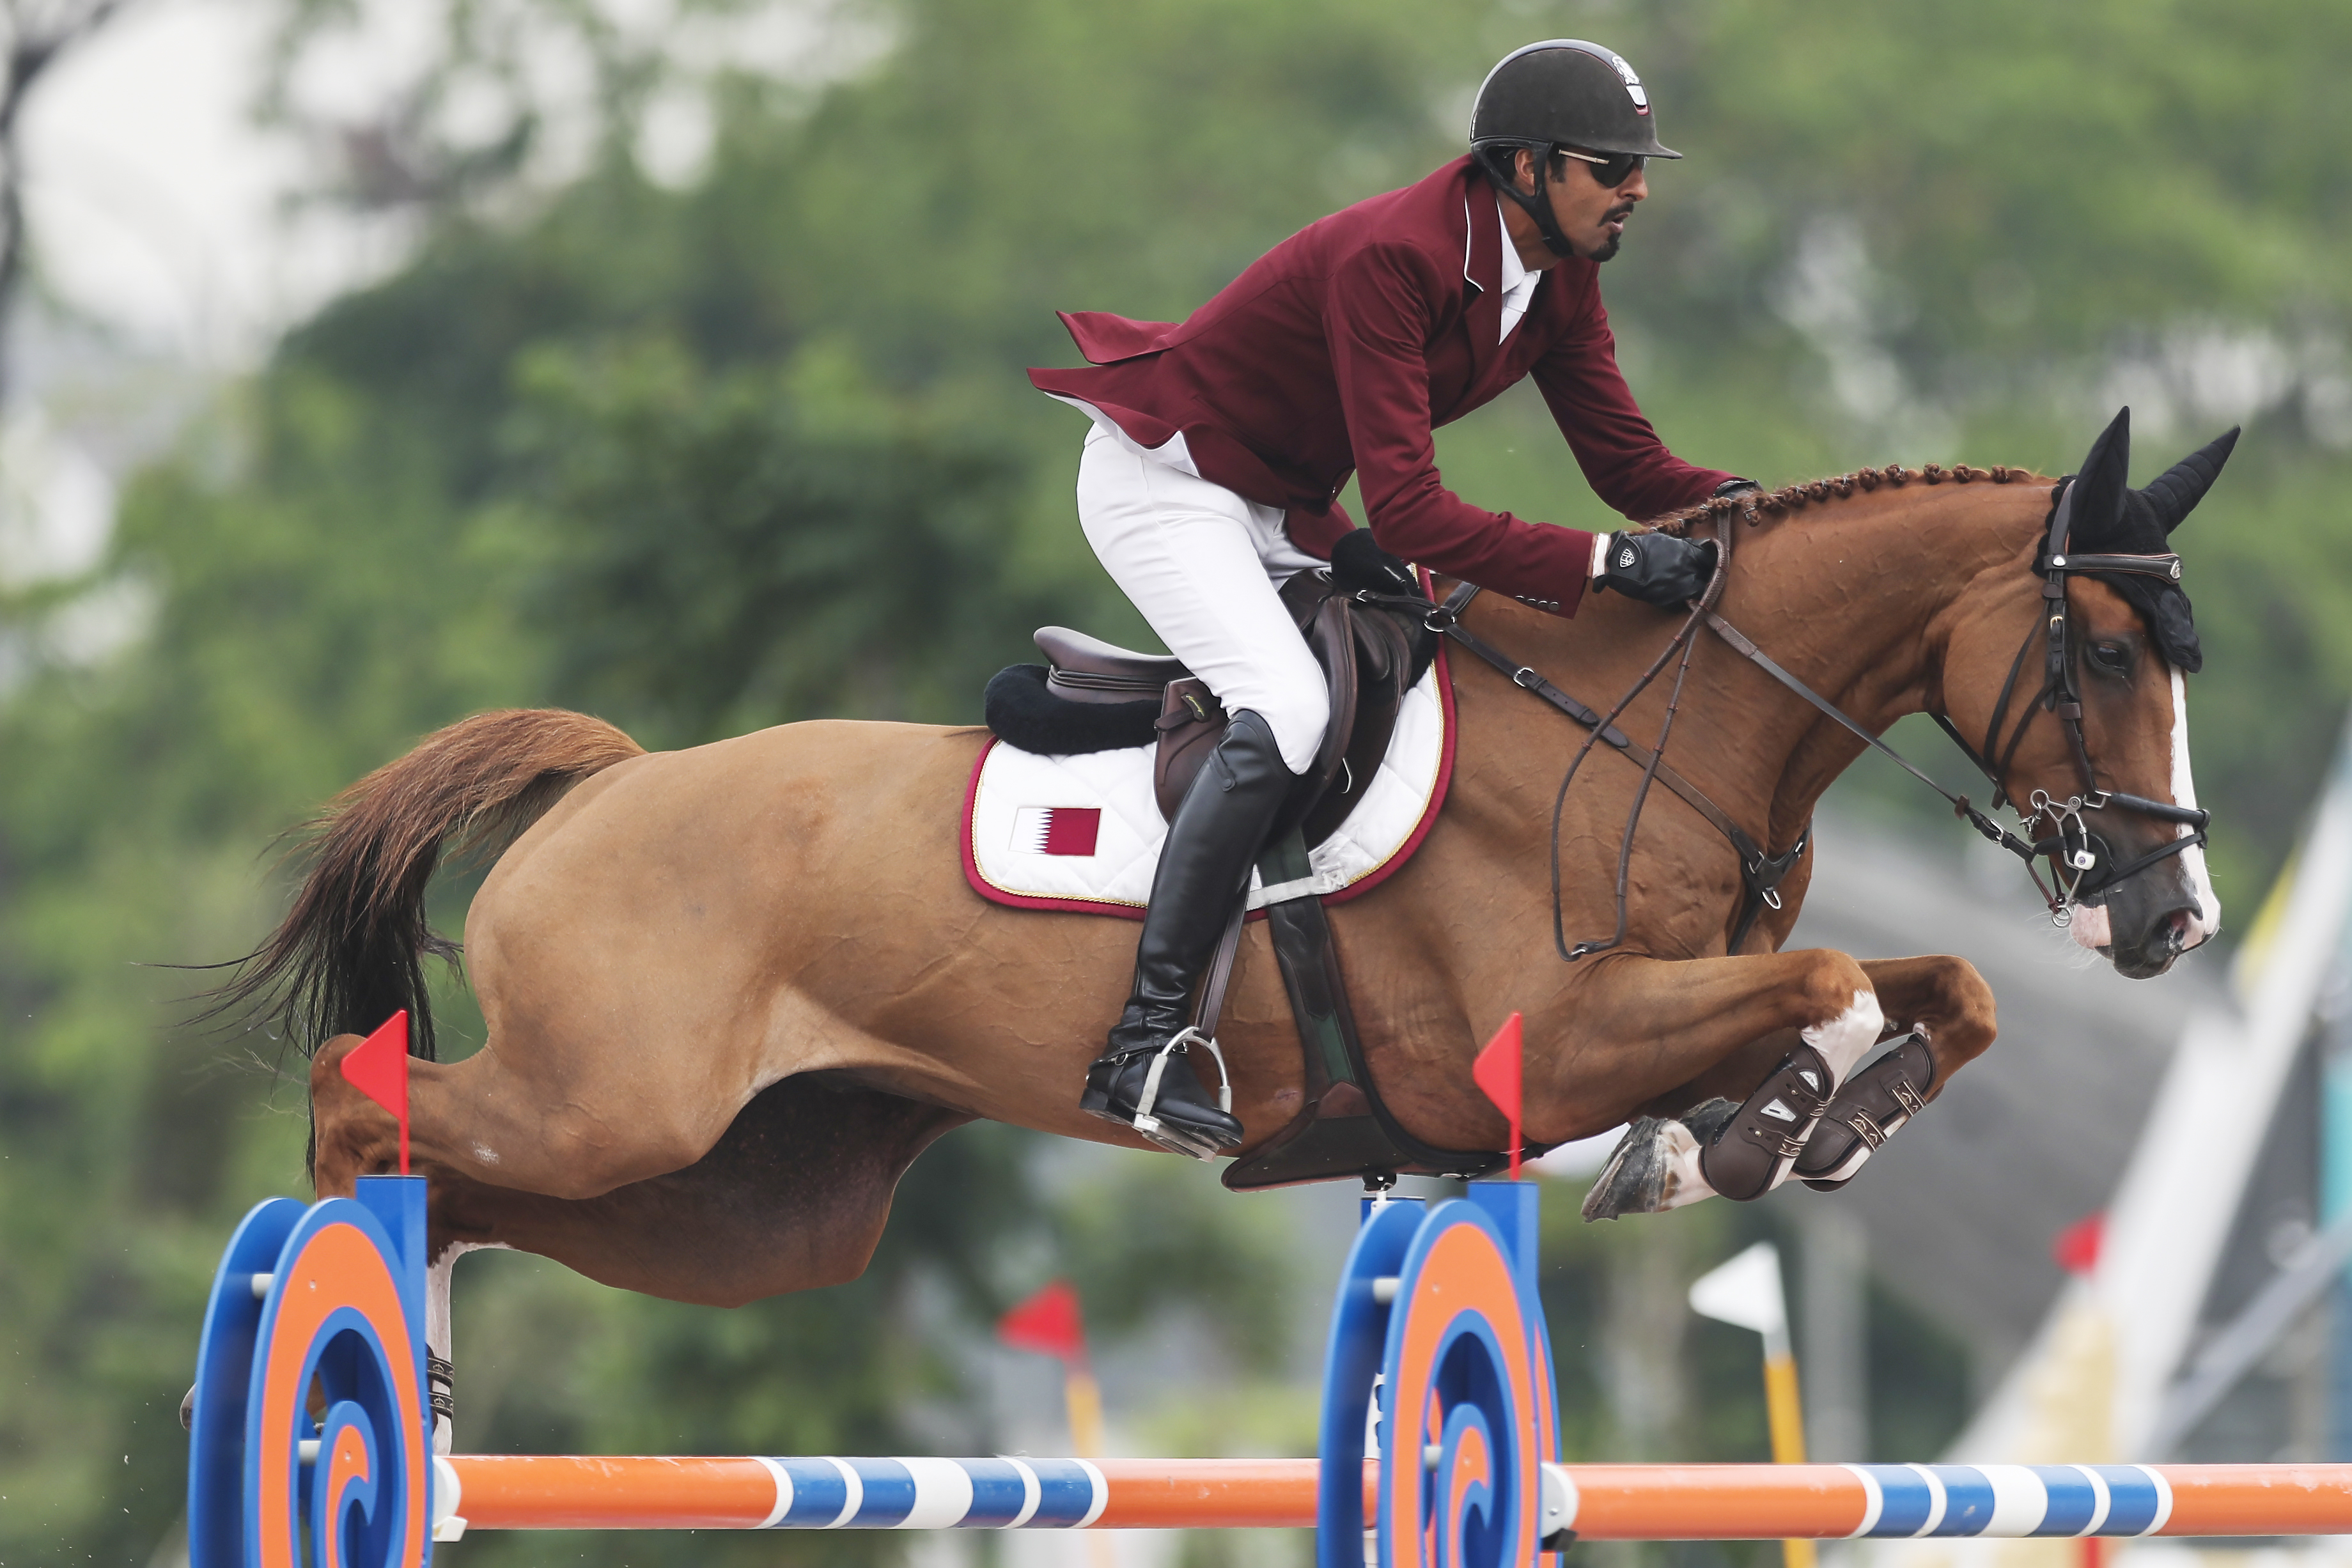 Ali Althani of Qatar rides Sirocco during the jumping event at the equestrian competition of the 18th Asian Games at Jakarta International Equestrian Park on August 28, 2018 in Jakarta, Indonesia. Photo FEI/Yong Teck Lim